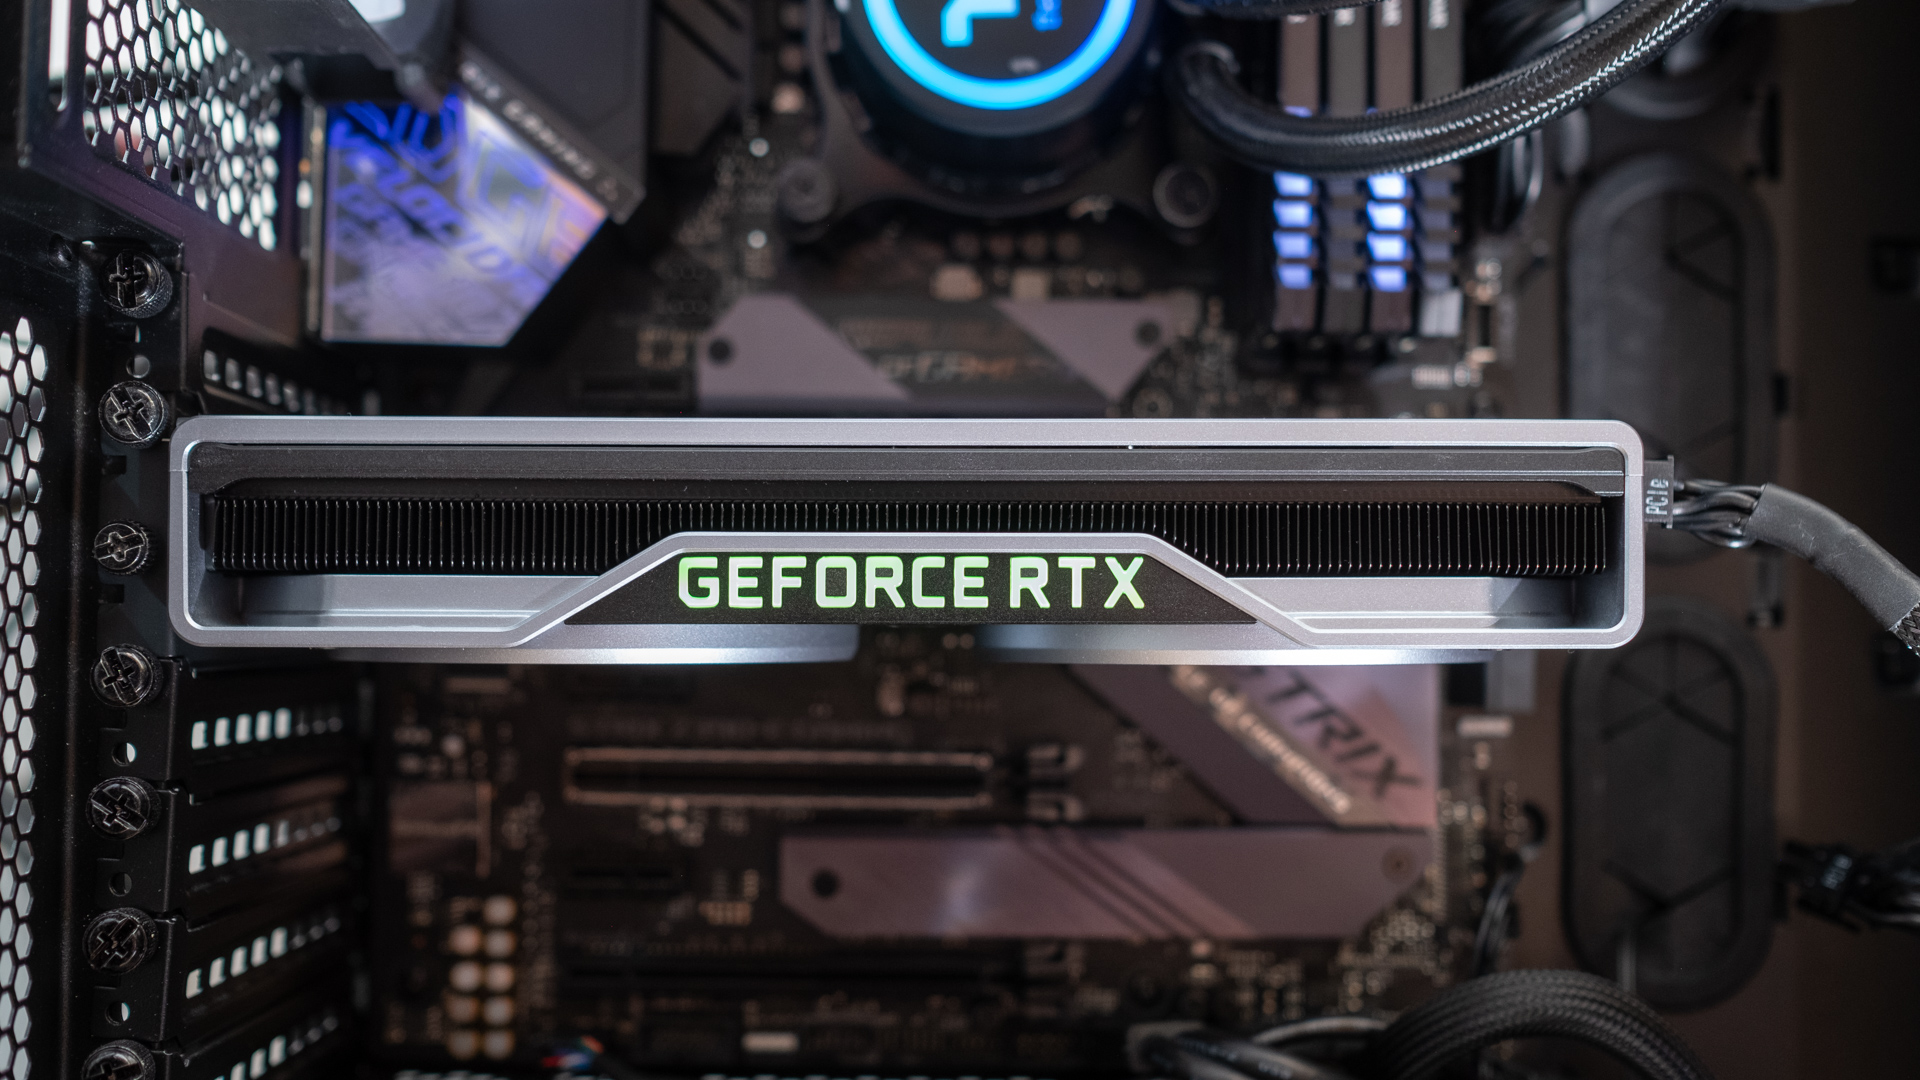 Nvidia RTX 2060 12GB won’t have Founders Edition, sparking price concerns